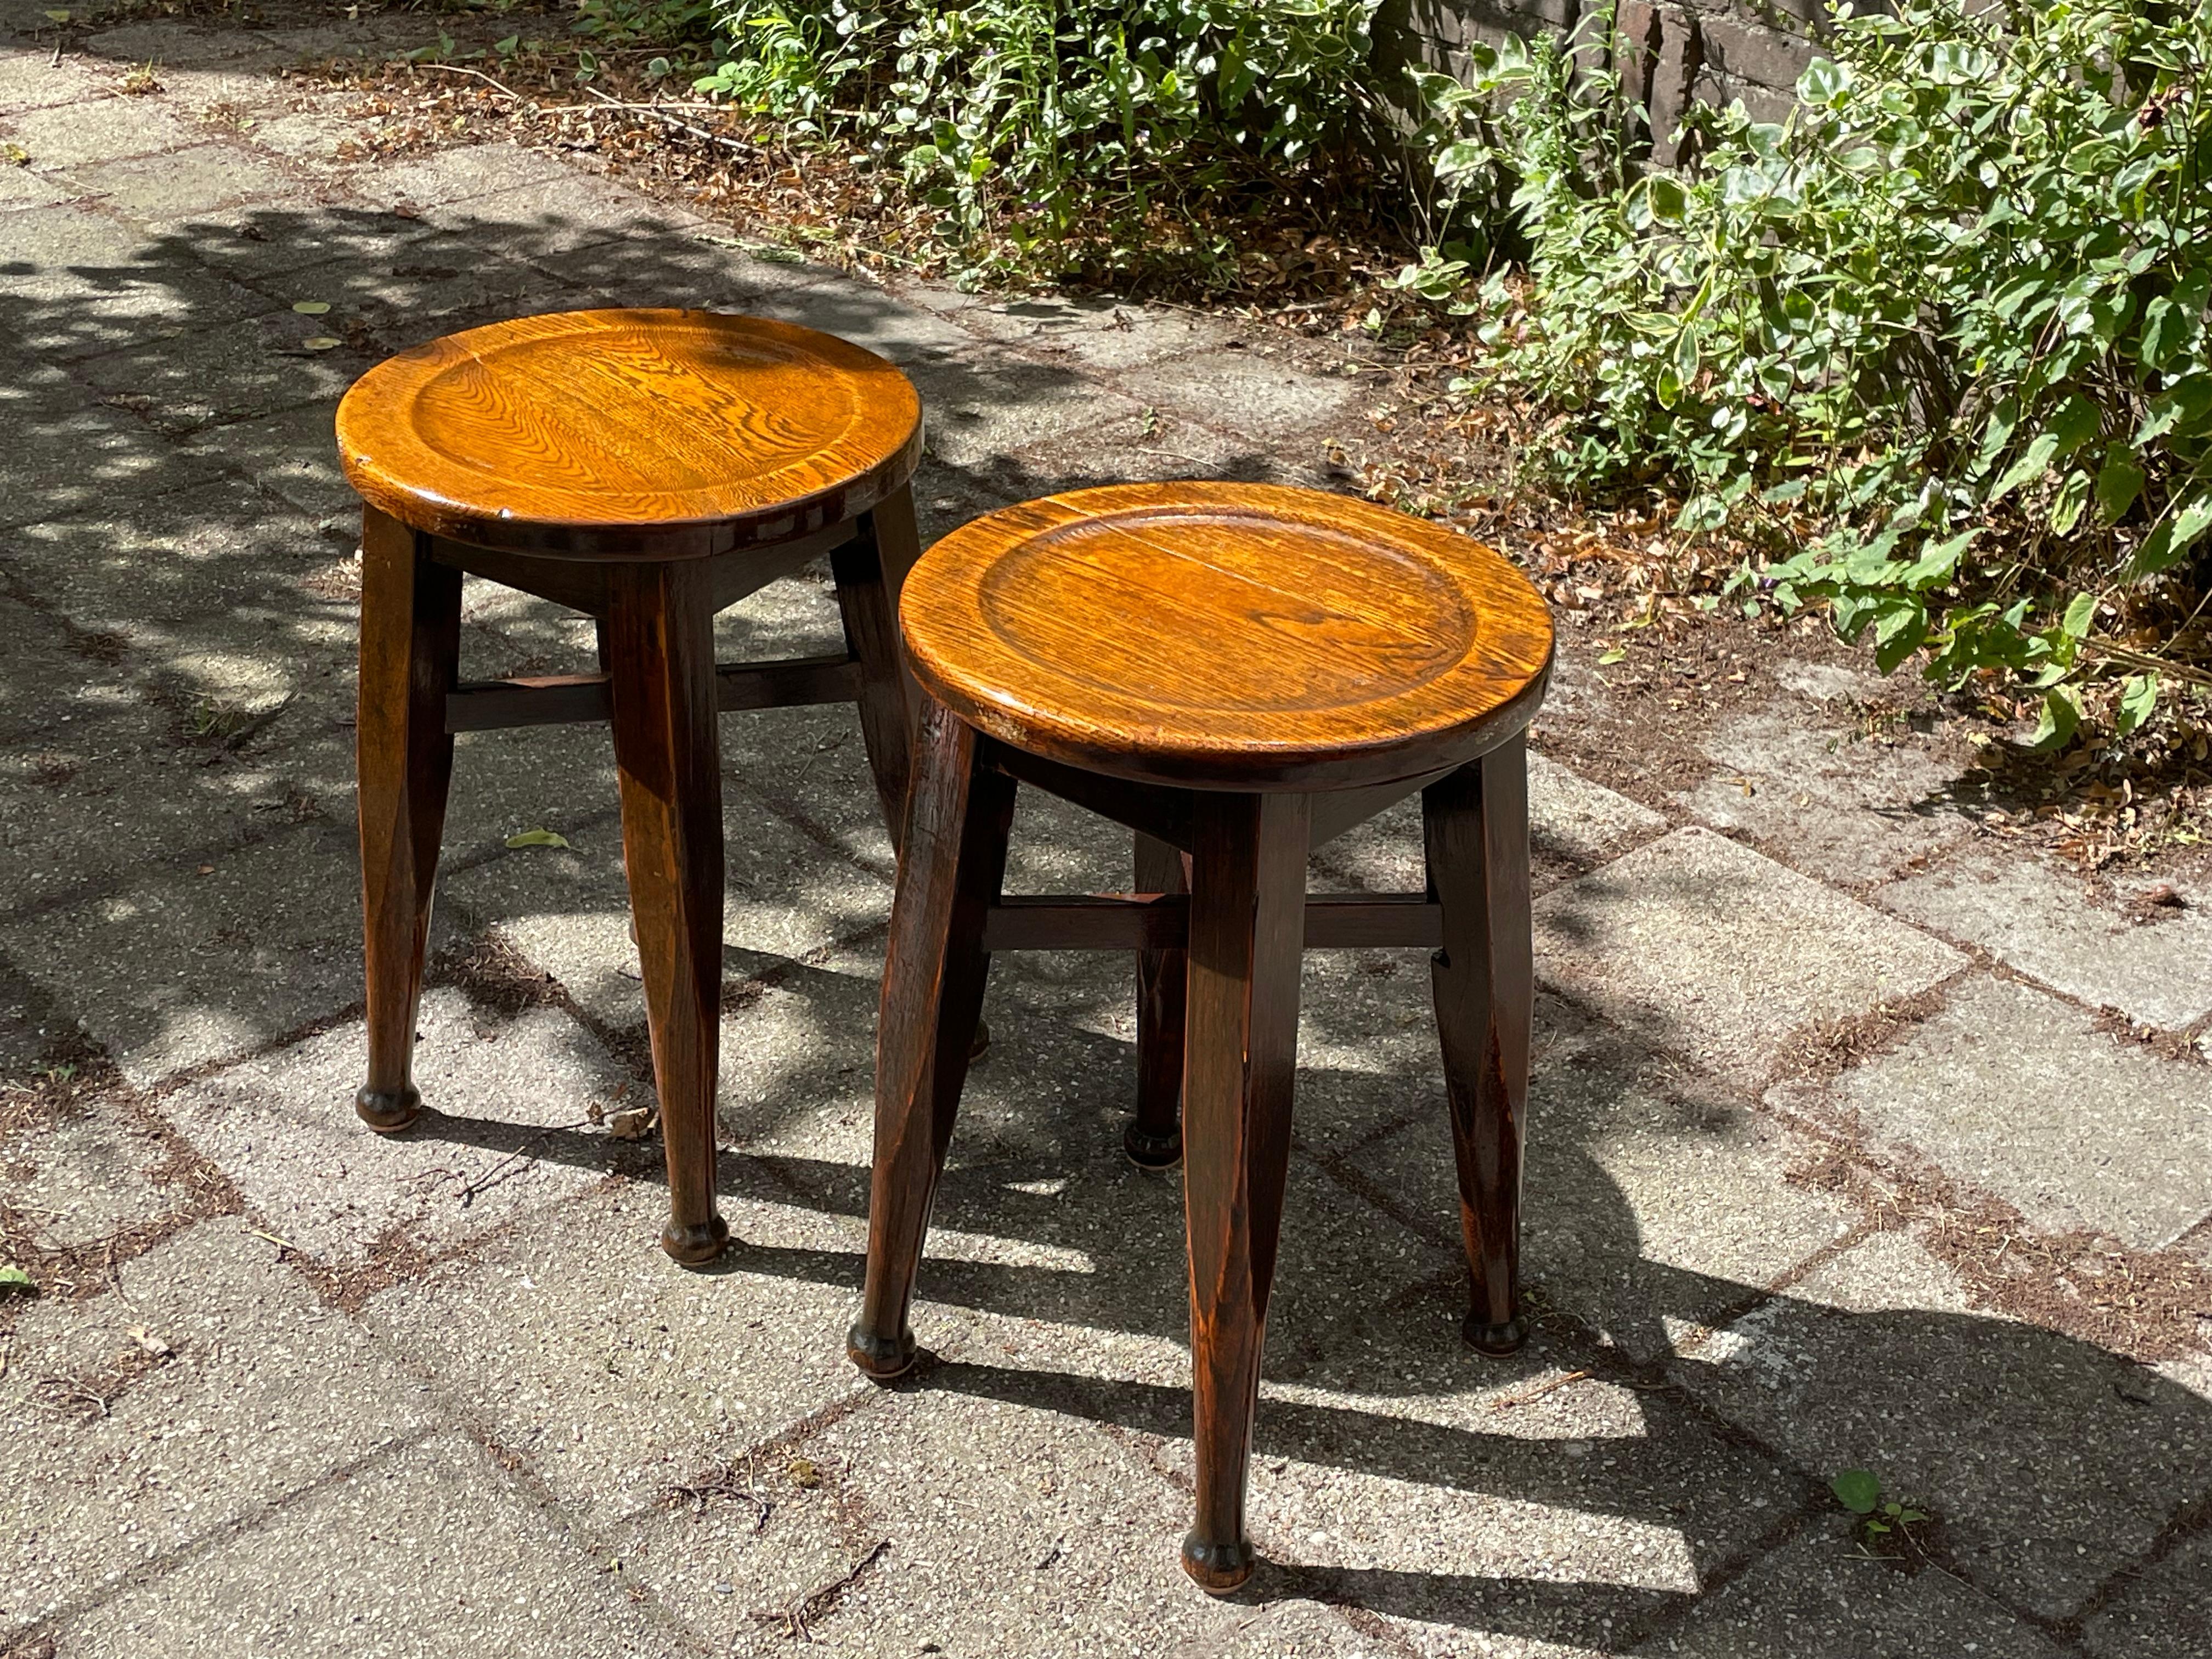 Rare and marked pair of antique stools. Great for an Arts and Crafts or Mission Style (inspired) interior.

Finding this rare pair of Arts and Crafts stools from the UK was a treat and to have found them in this very good condition made this find